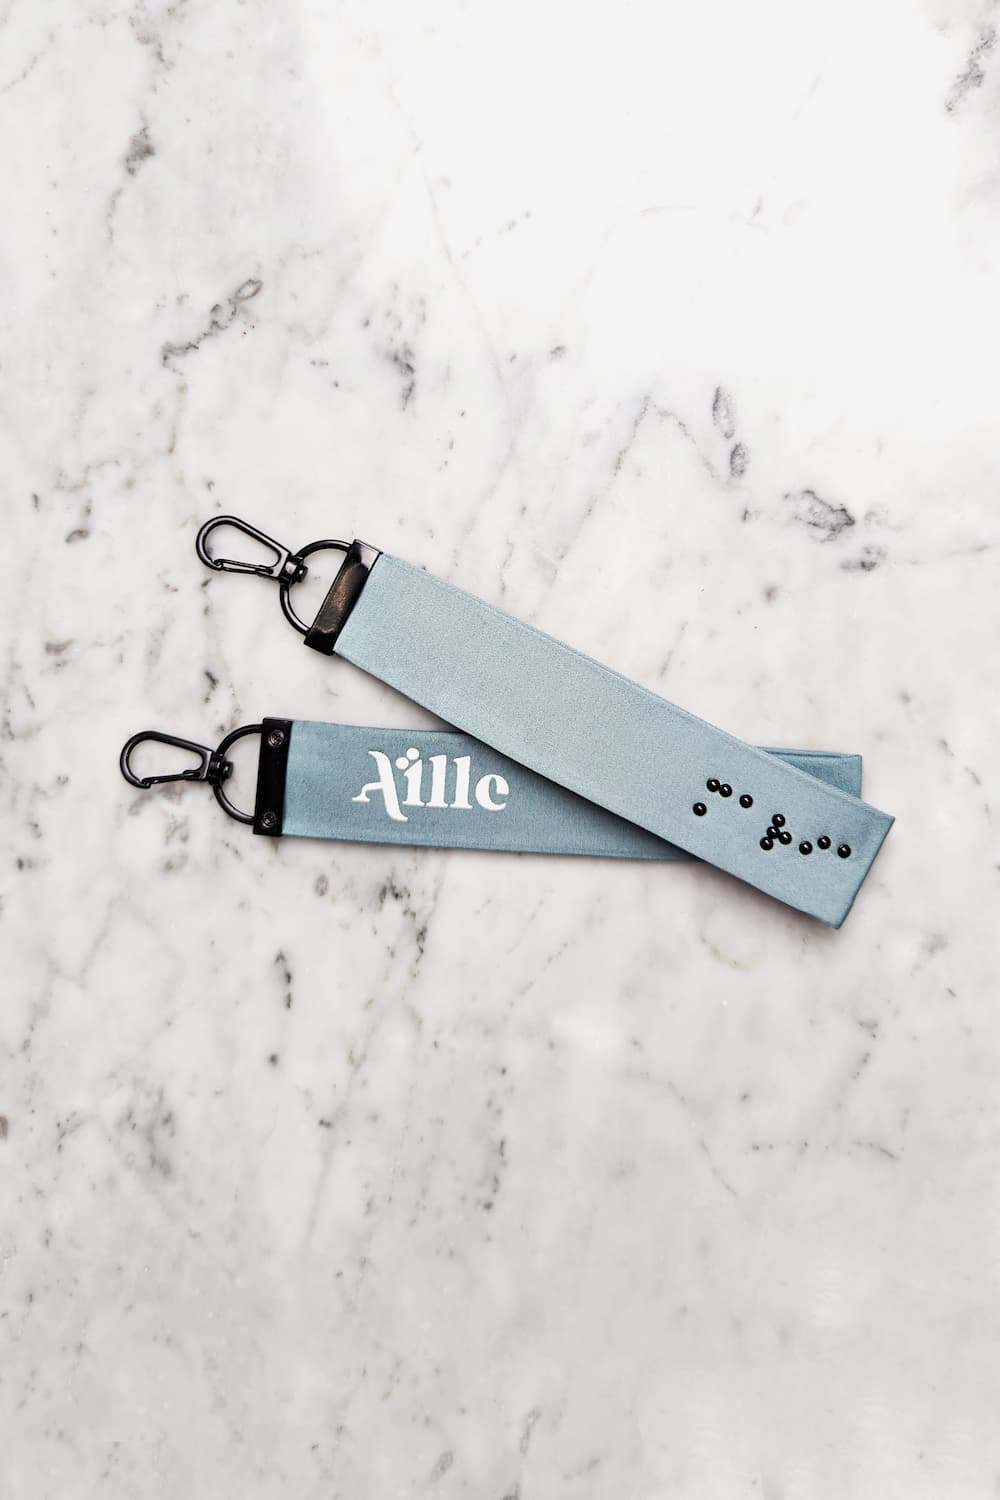 Light blue/grey keychain with black braille on one side and a white screen printed Aille Design logo on the other side.